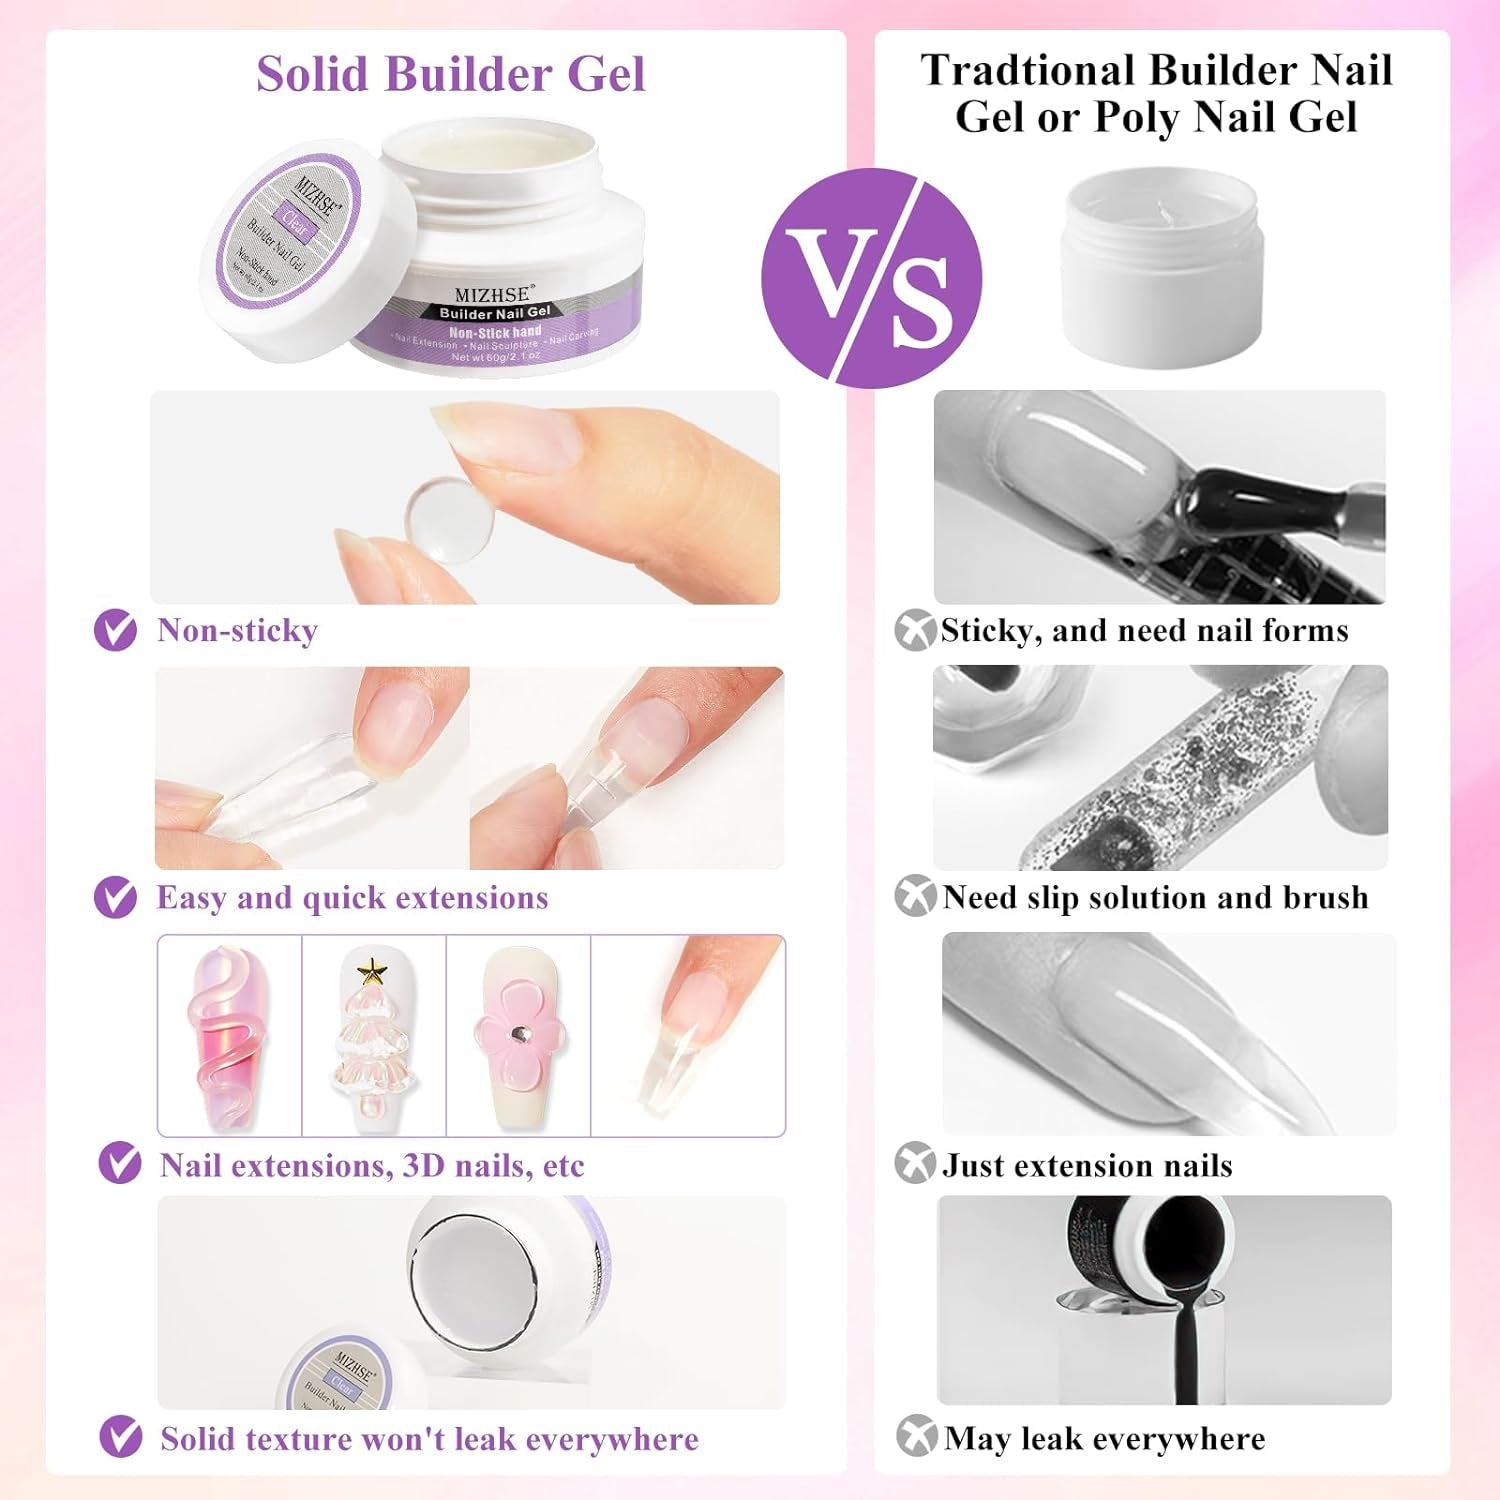 Solid Builder Gel for Nails, 60G Large Capacity Clear Hard Gel for Nails 3D Sculpting Gel Non-Sticky Hand Carving Gel UV LED Nail Extension Gel with 3D Silicone Mold Nail Art Salon Home DIY